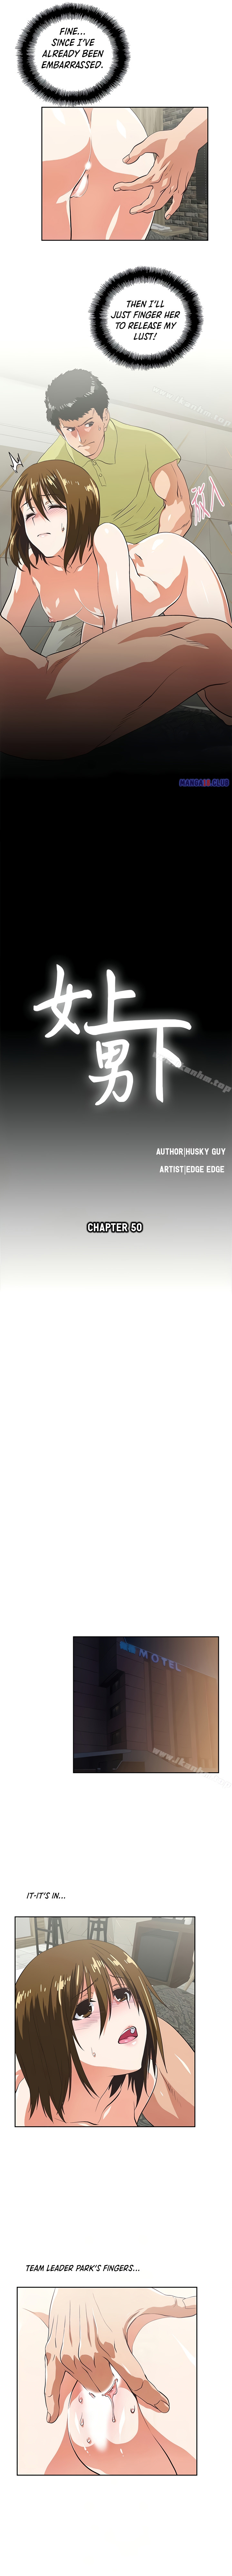 Up and Down - Chapter 50 Page 2